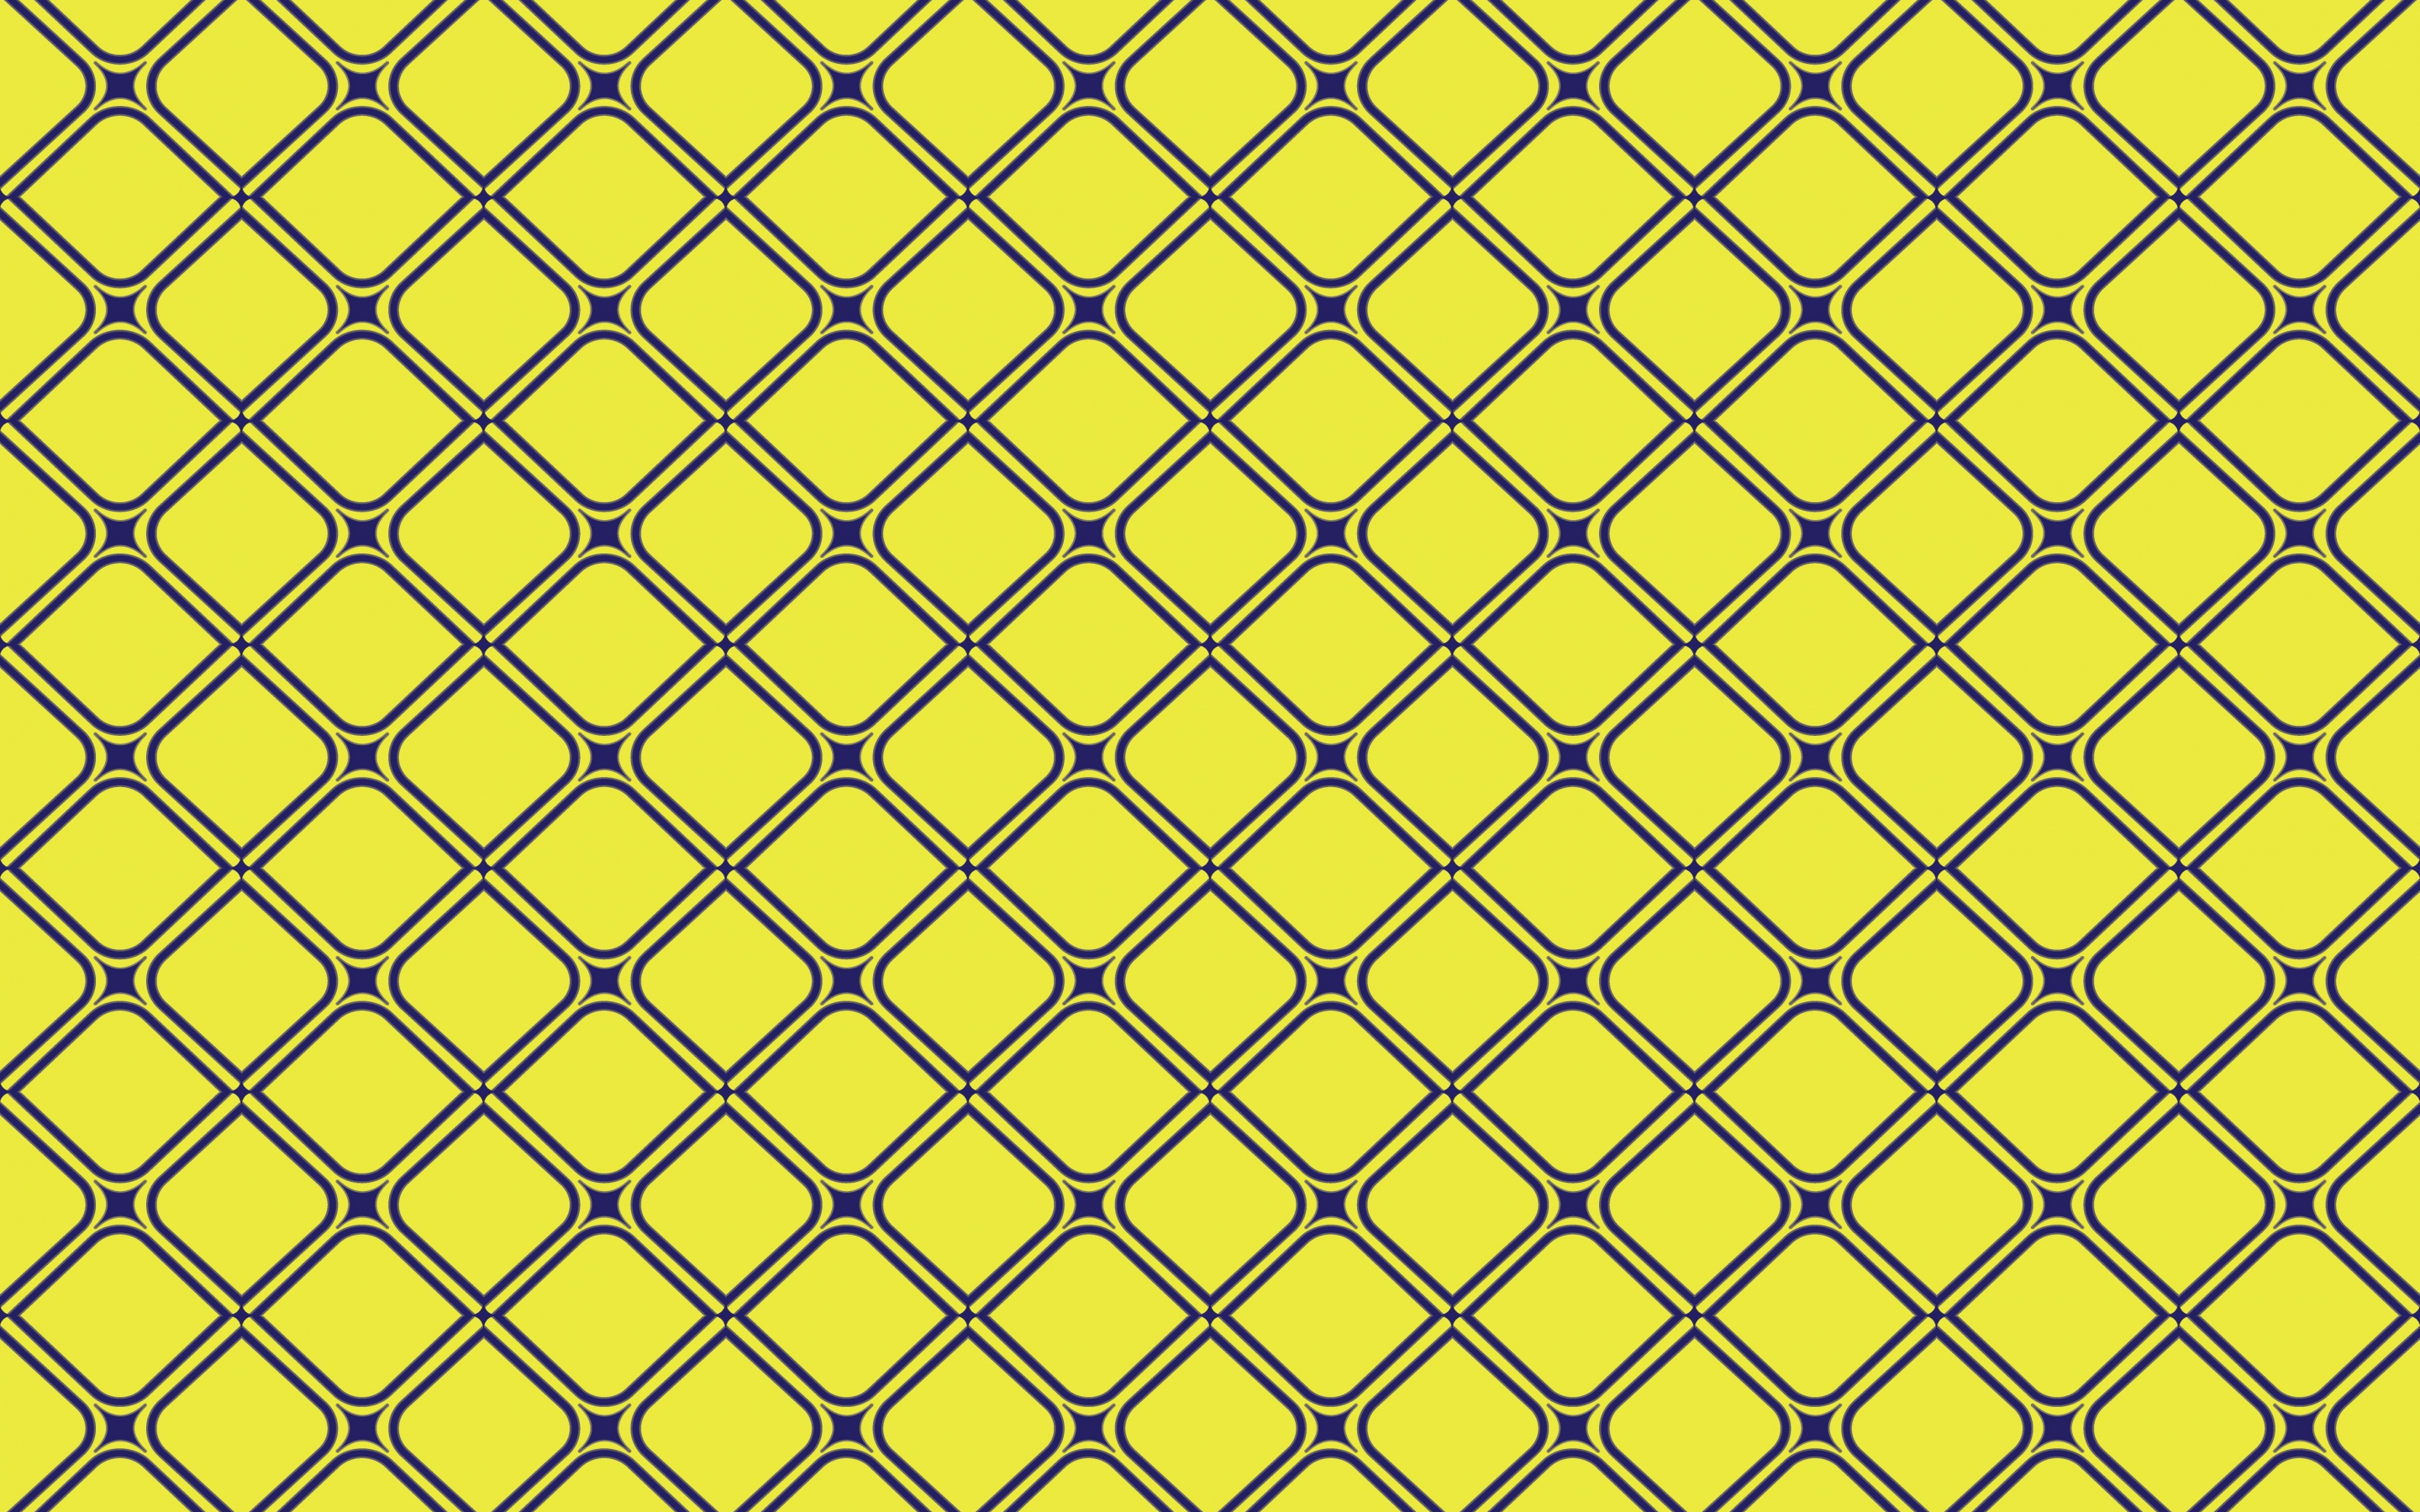 Texture, squares, pattern, abstract, 2880x1800 wallpaper